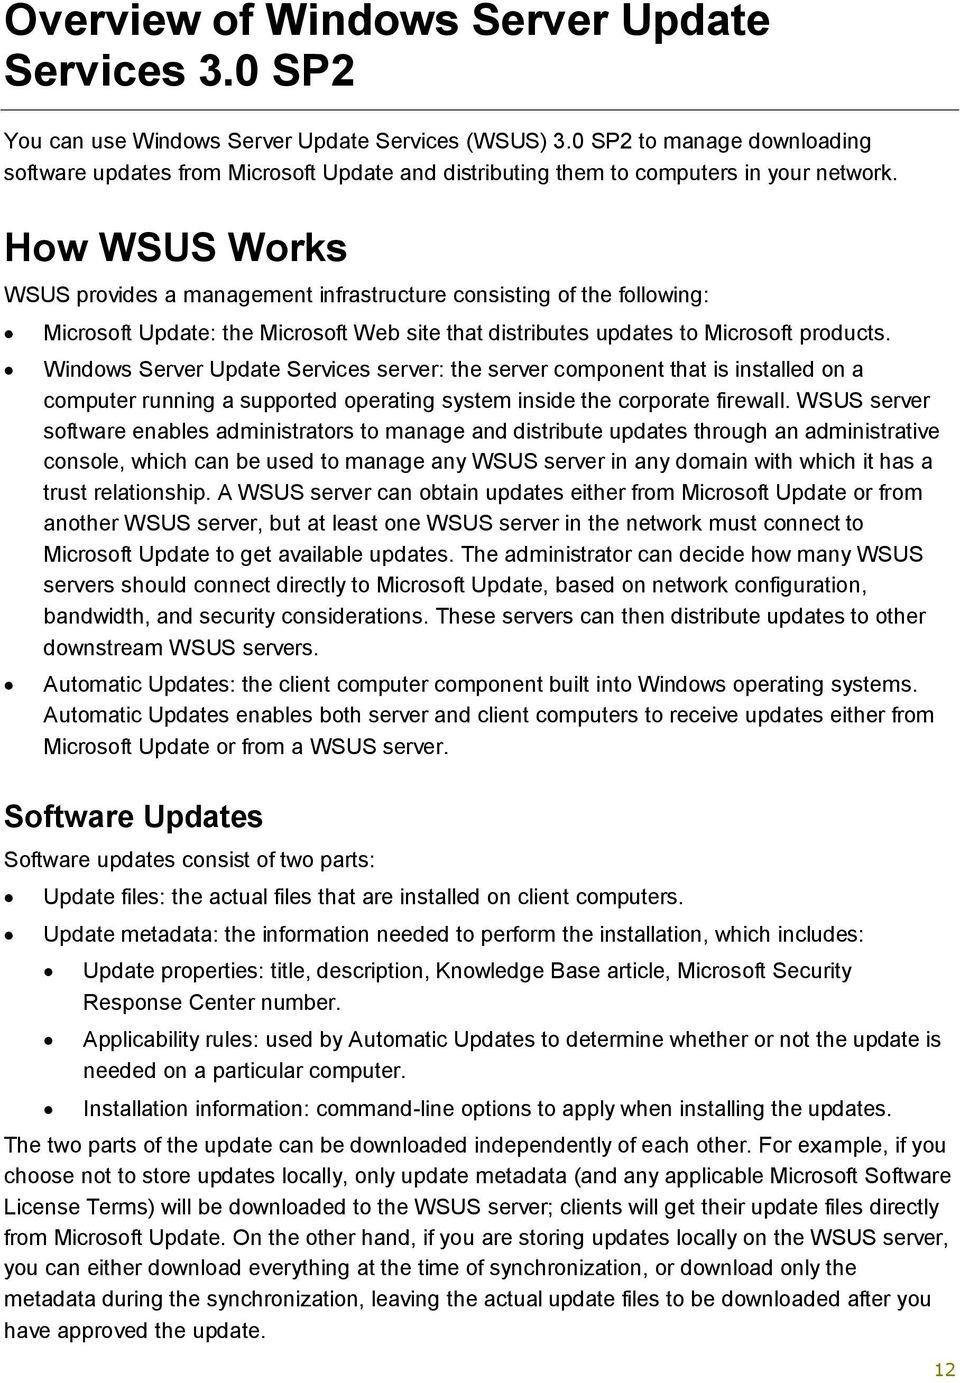 How WSUS Works WSUS provides a management infrastructure consisting of the following: Microsoft Update: the Microsoft Web site that distributes updates to Microsoft products.